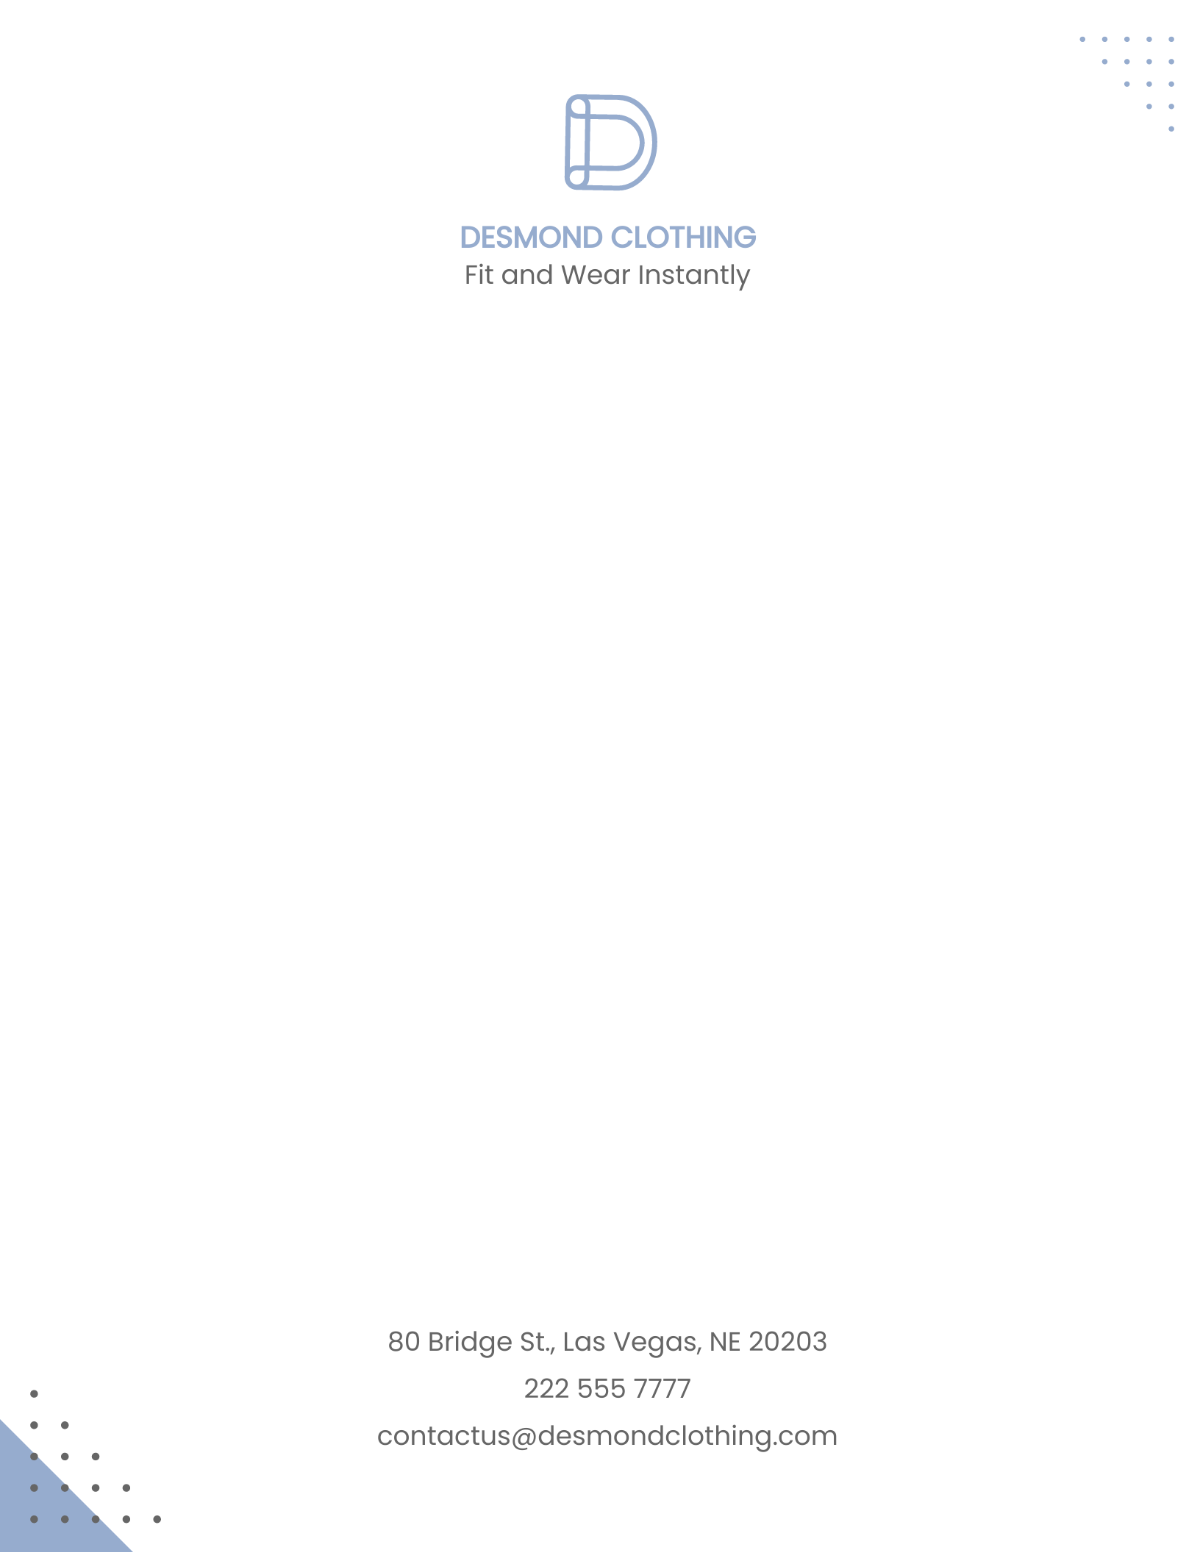 Clothing Store Letterhead Template